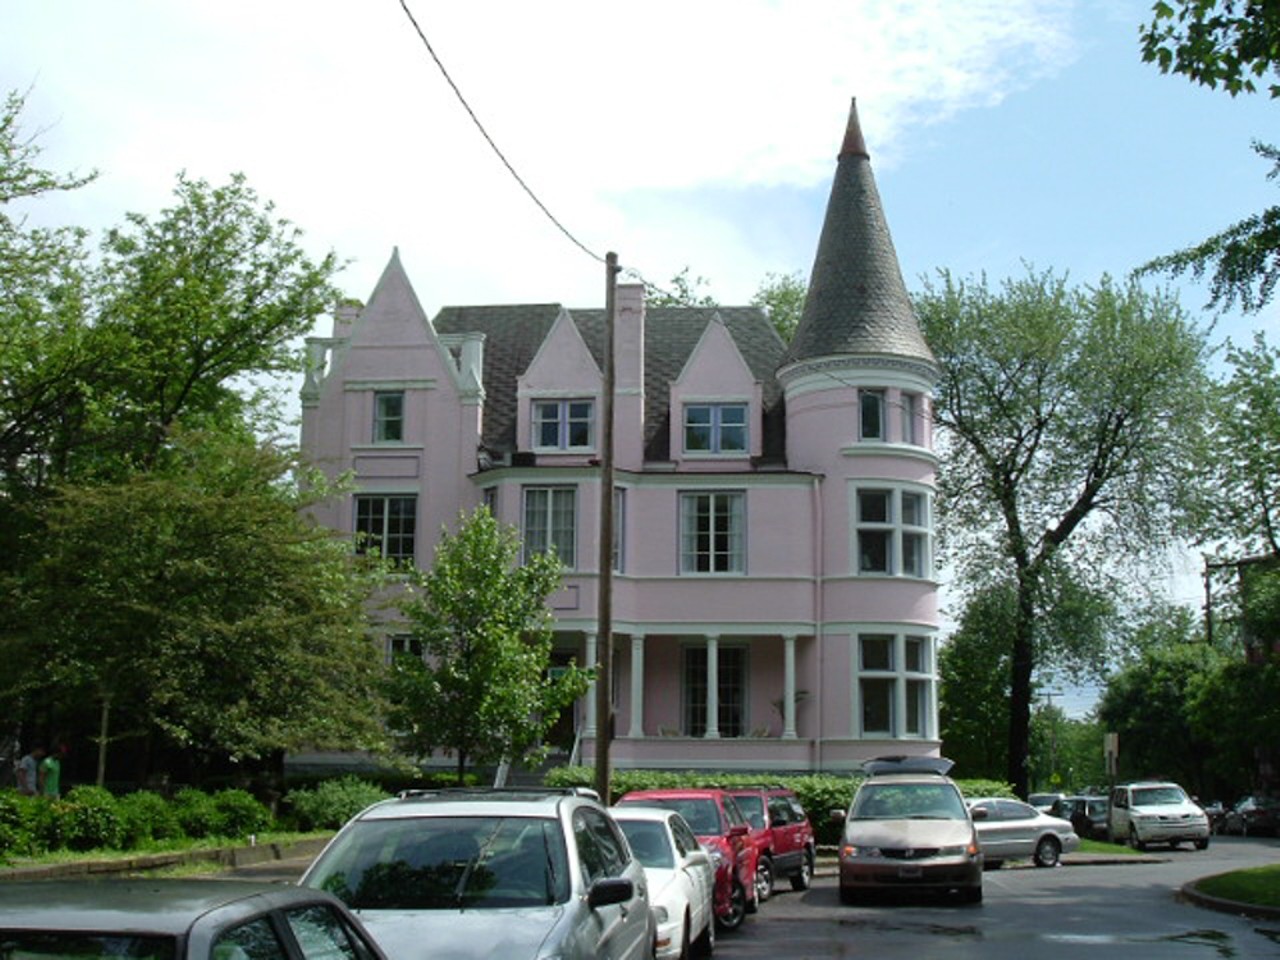  The Pink Palace 
1473 St. James Court  
The Pink Palace, formerly a gentleman&#146;s club and casino, is purported to be haunted by an older man named Avery, who appears to residents to warn them of future danger. Photo via  Wikimedia 